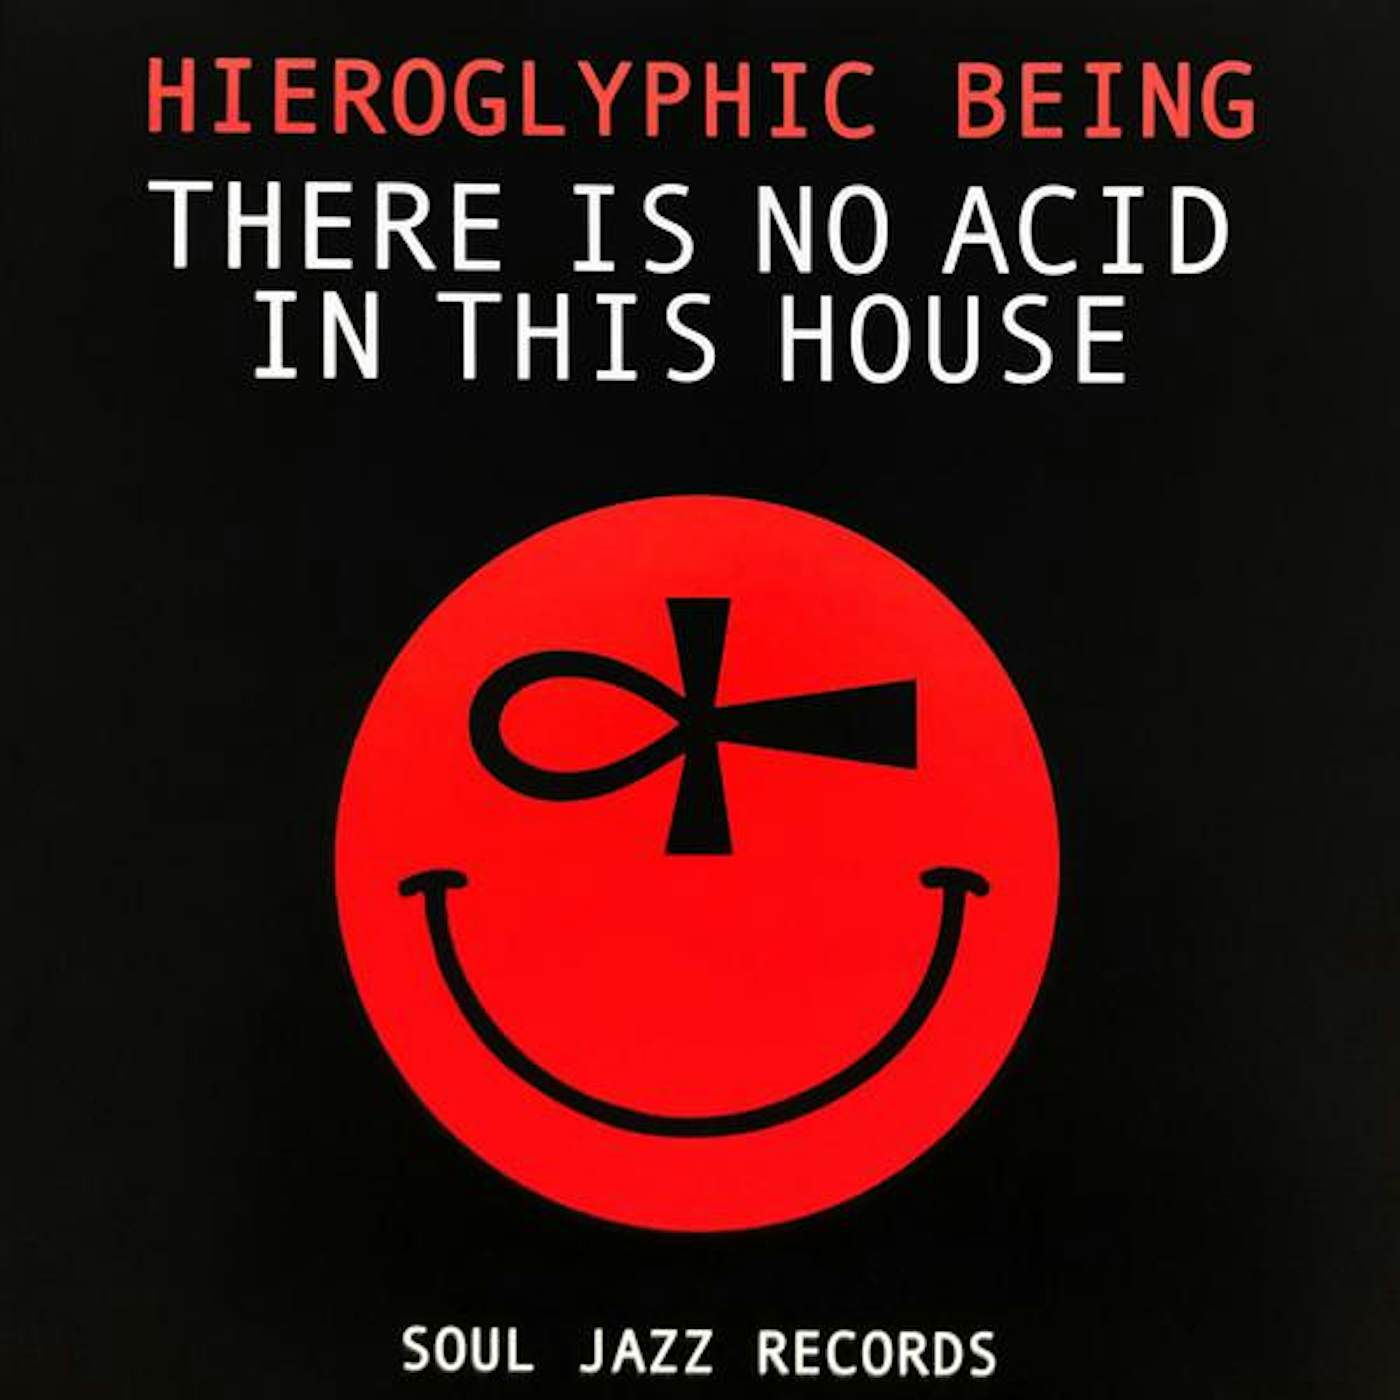 Hieroglyphic Being THERE IS NO ACID IN THIS HOUSE (2LP) Vinyl Record